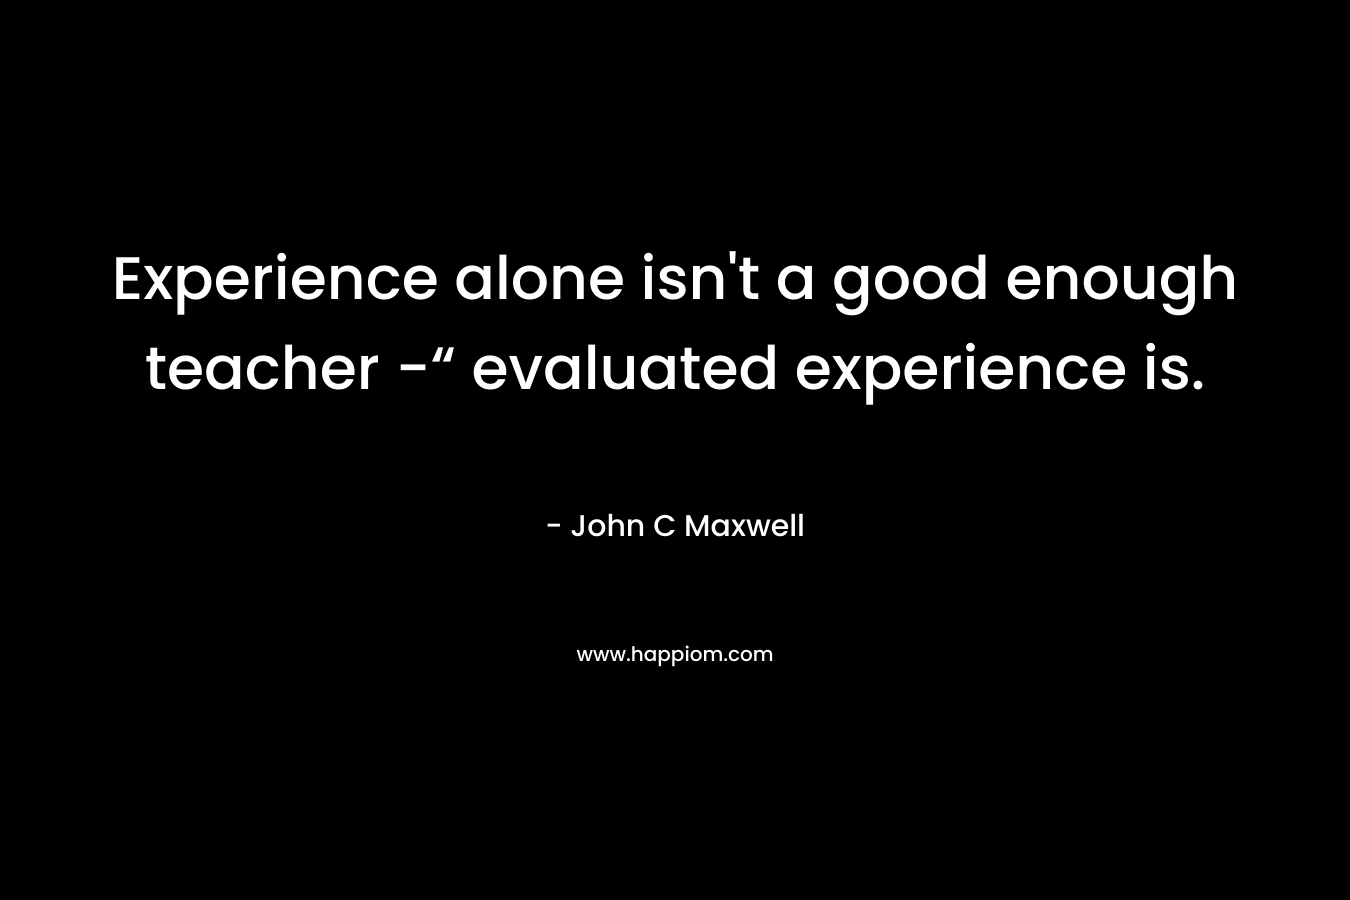 Experience alone isn’t a good enough teacher -“ evaluated experience is. – John C Maxwell